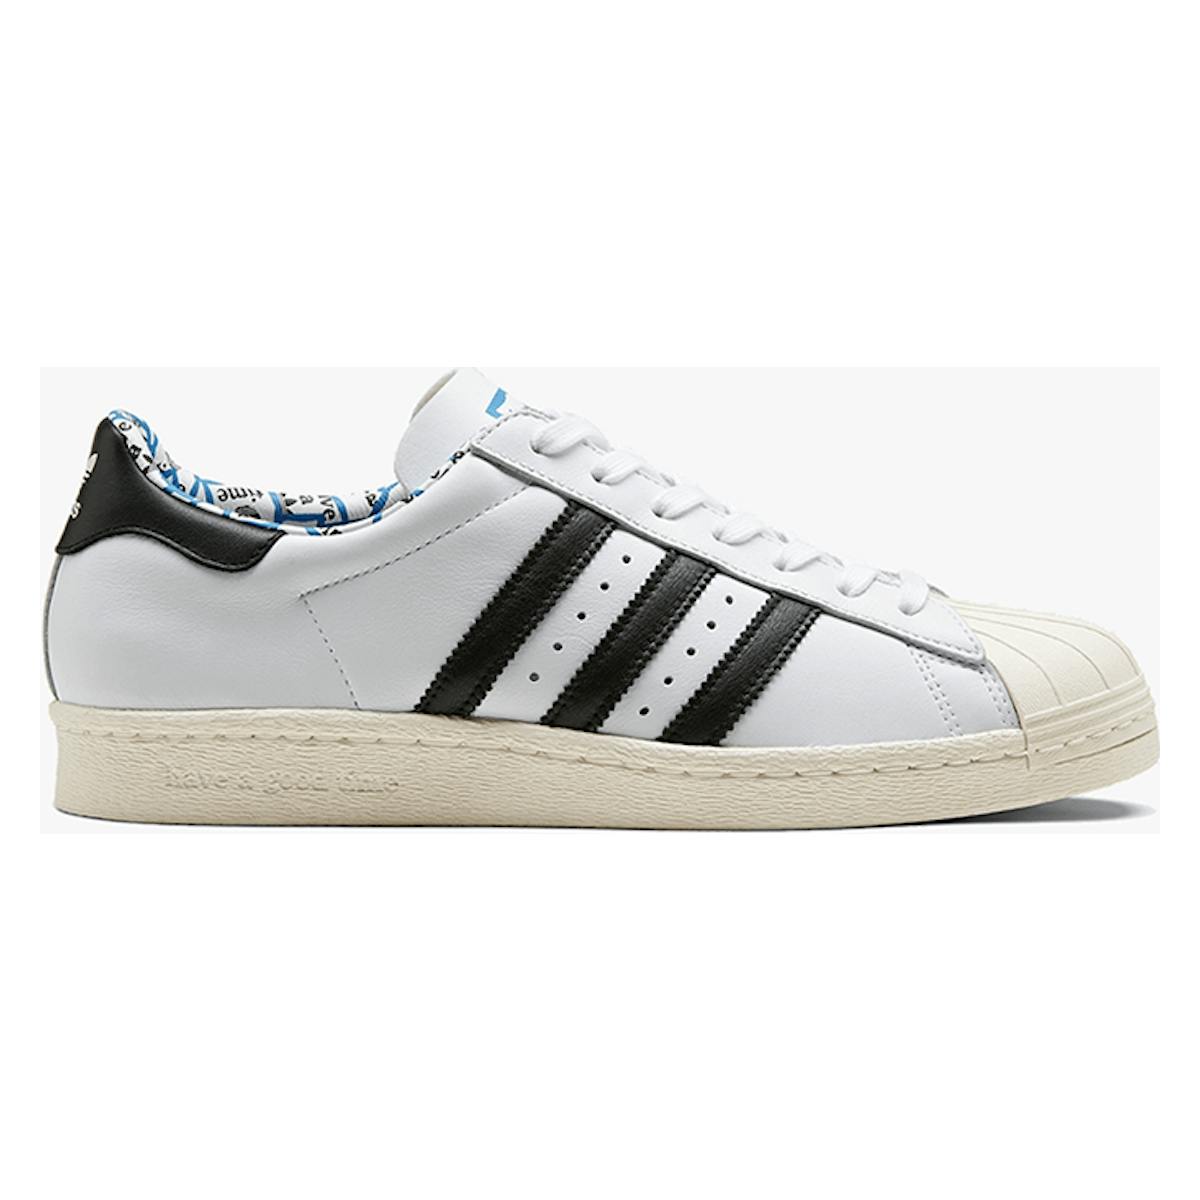 Have A Good Time x Adidas Superstar 80s "Chalk White"